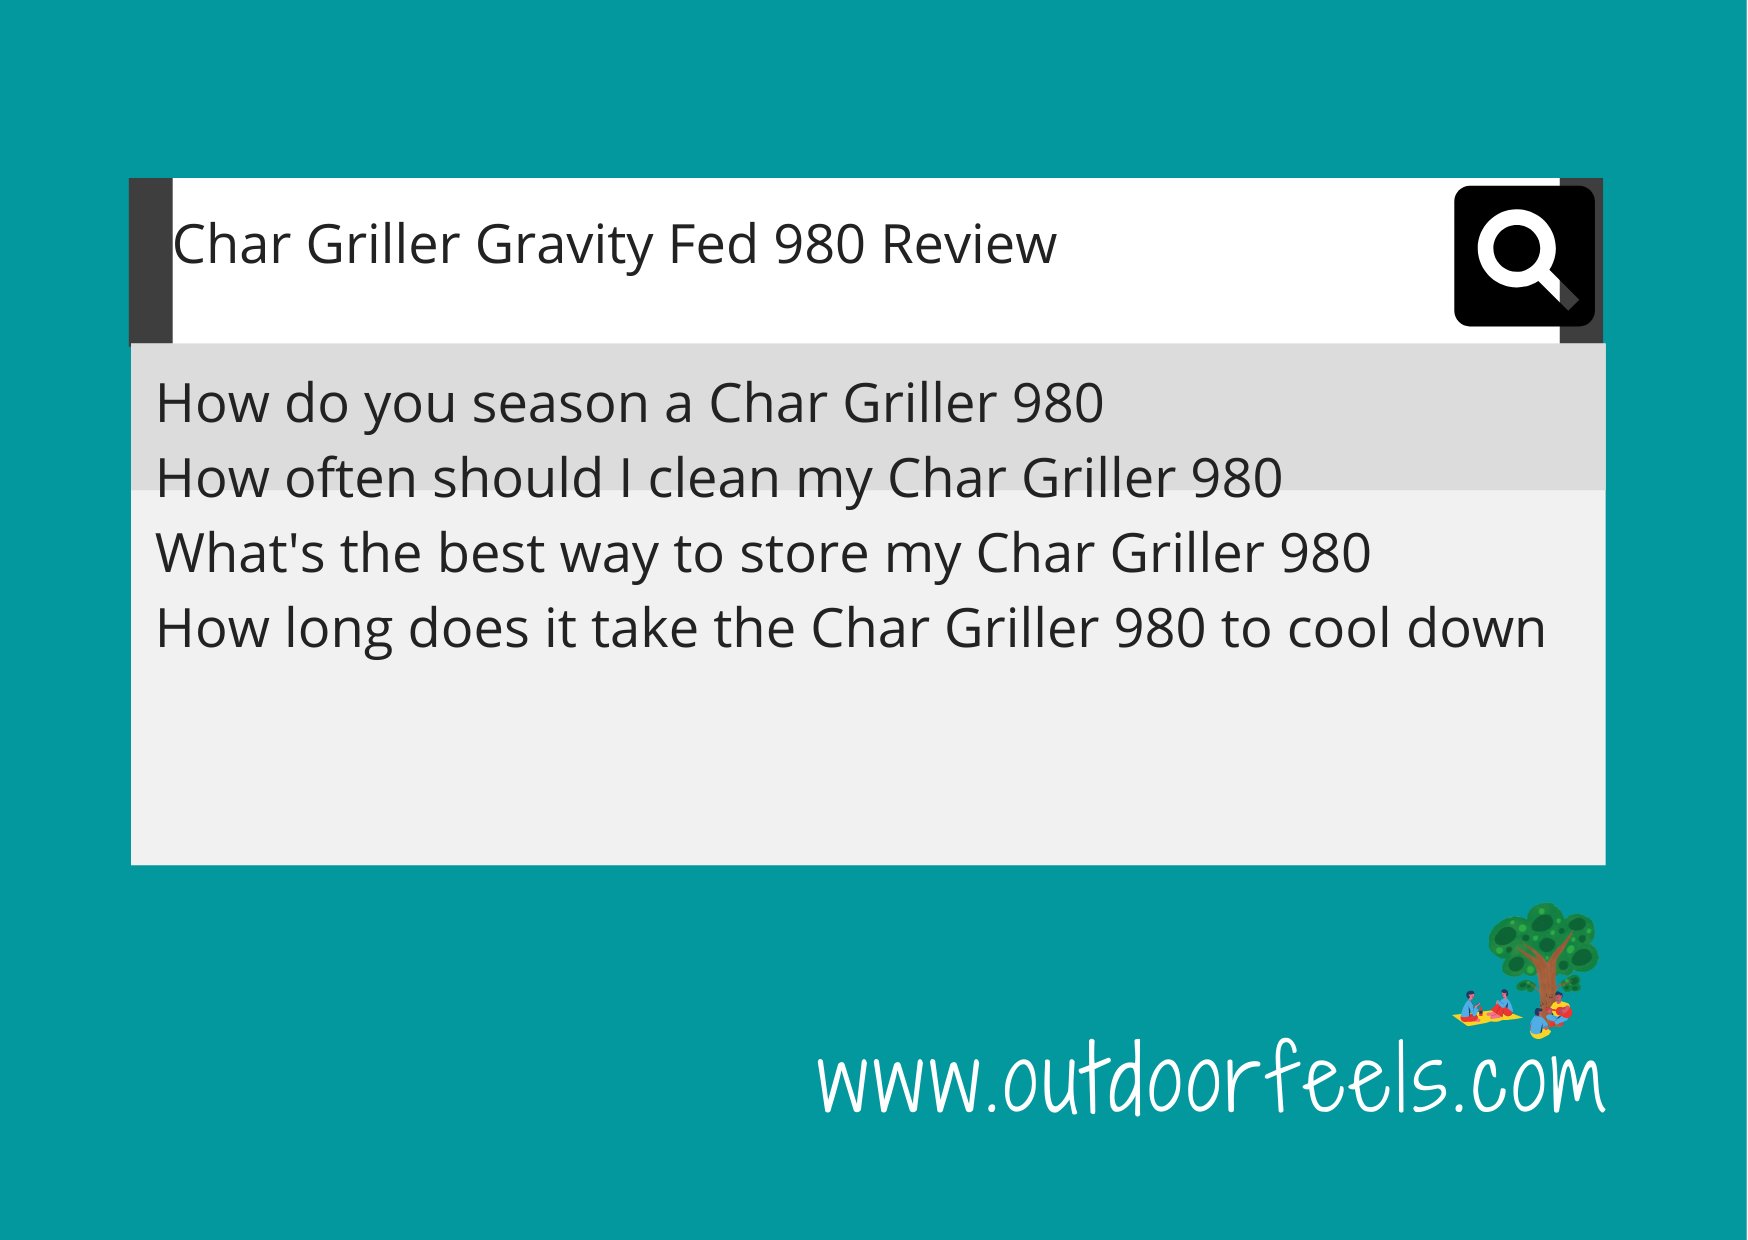 Char Griller Gravity Fed 980 Review_Featured Image